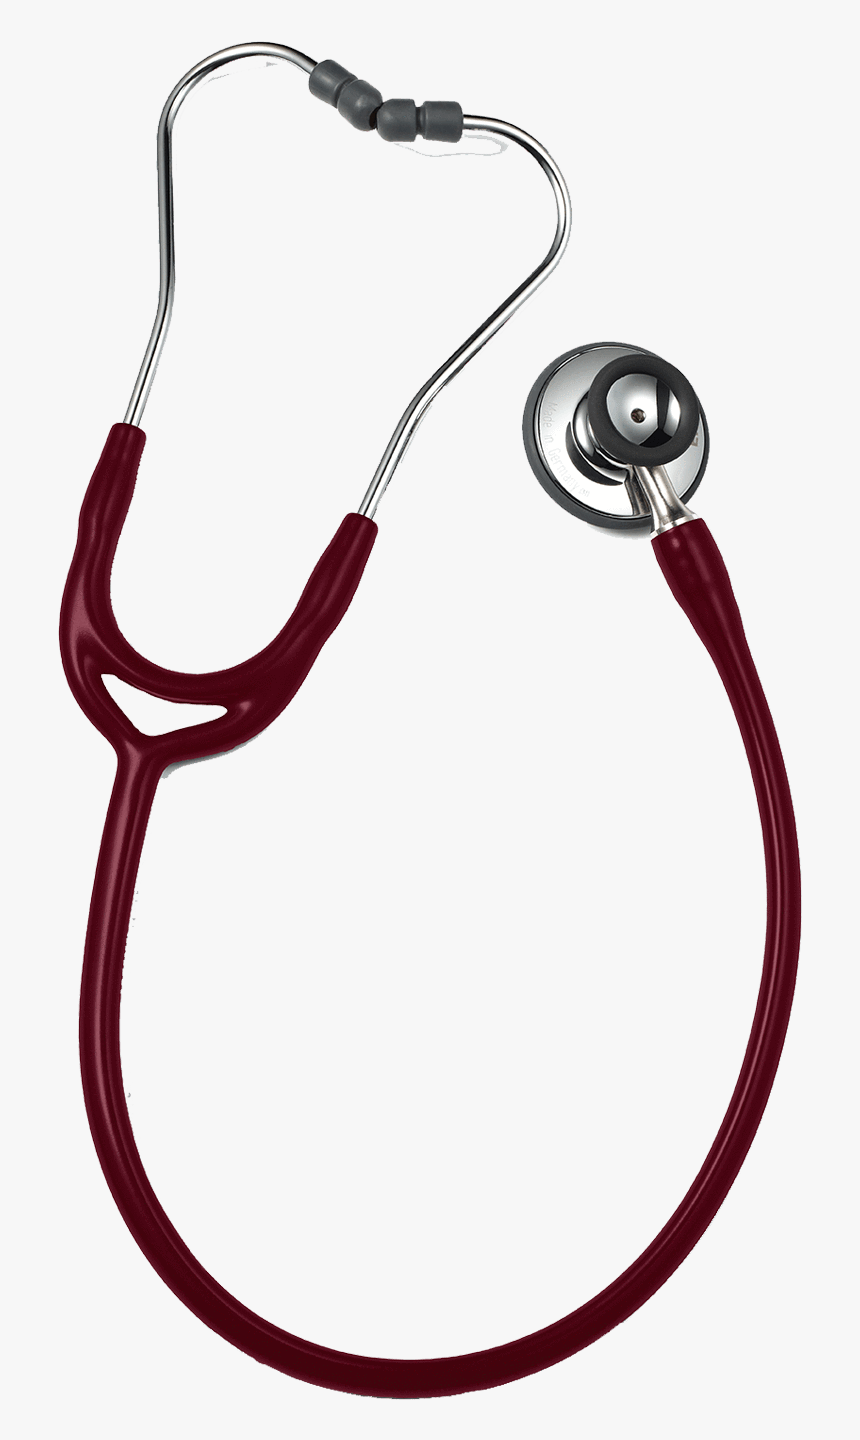 Erka Precise Stethoscope, HD Png Download, Free Download